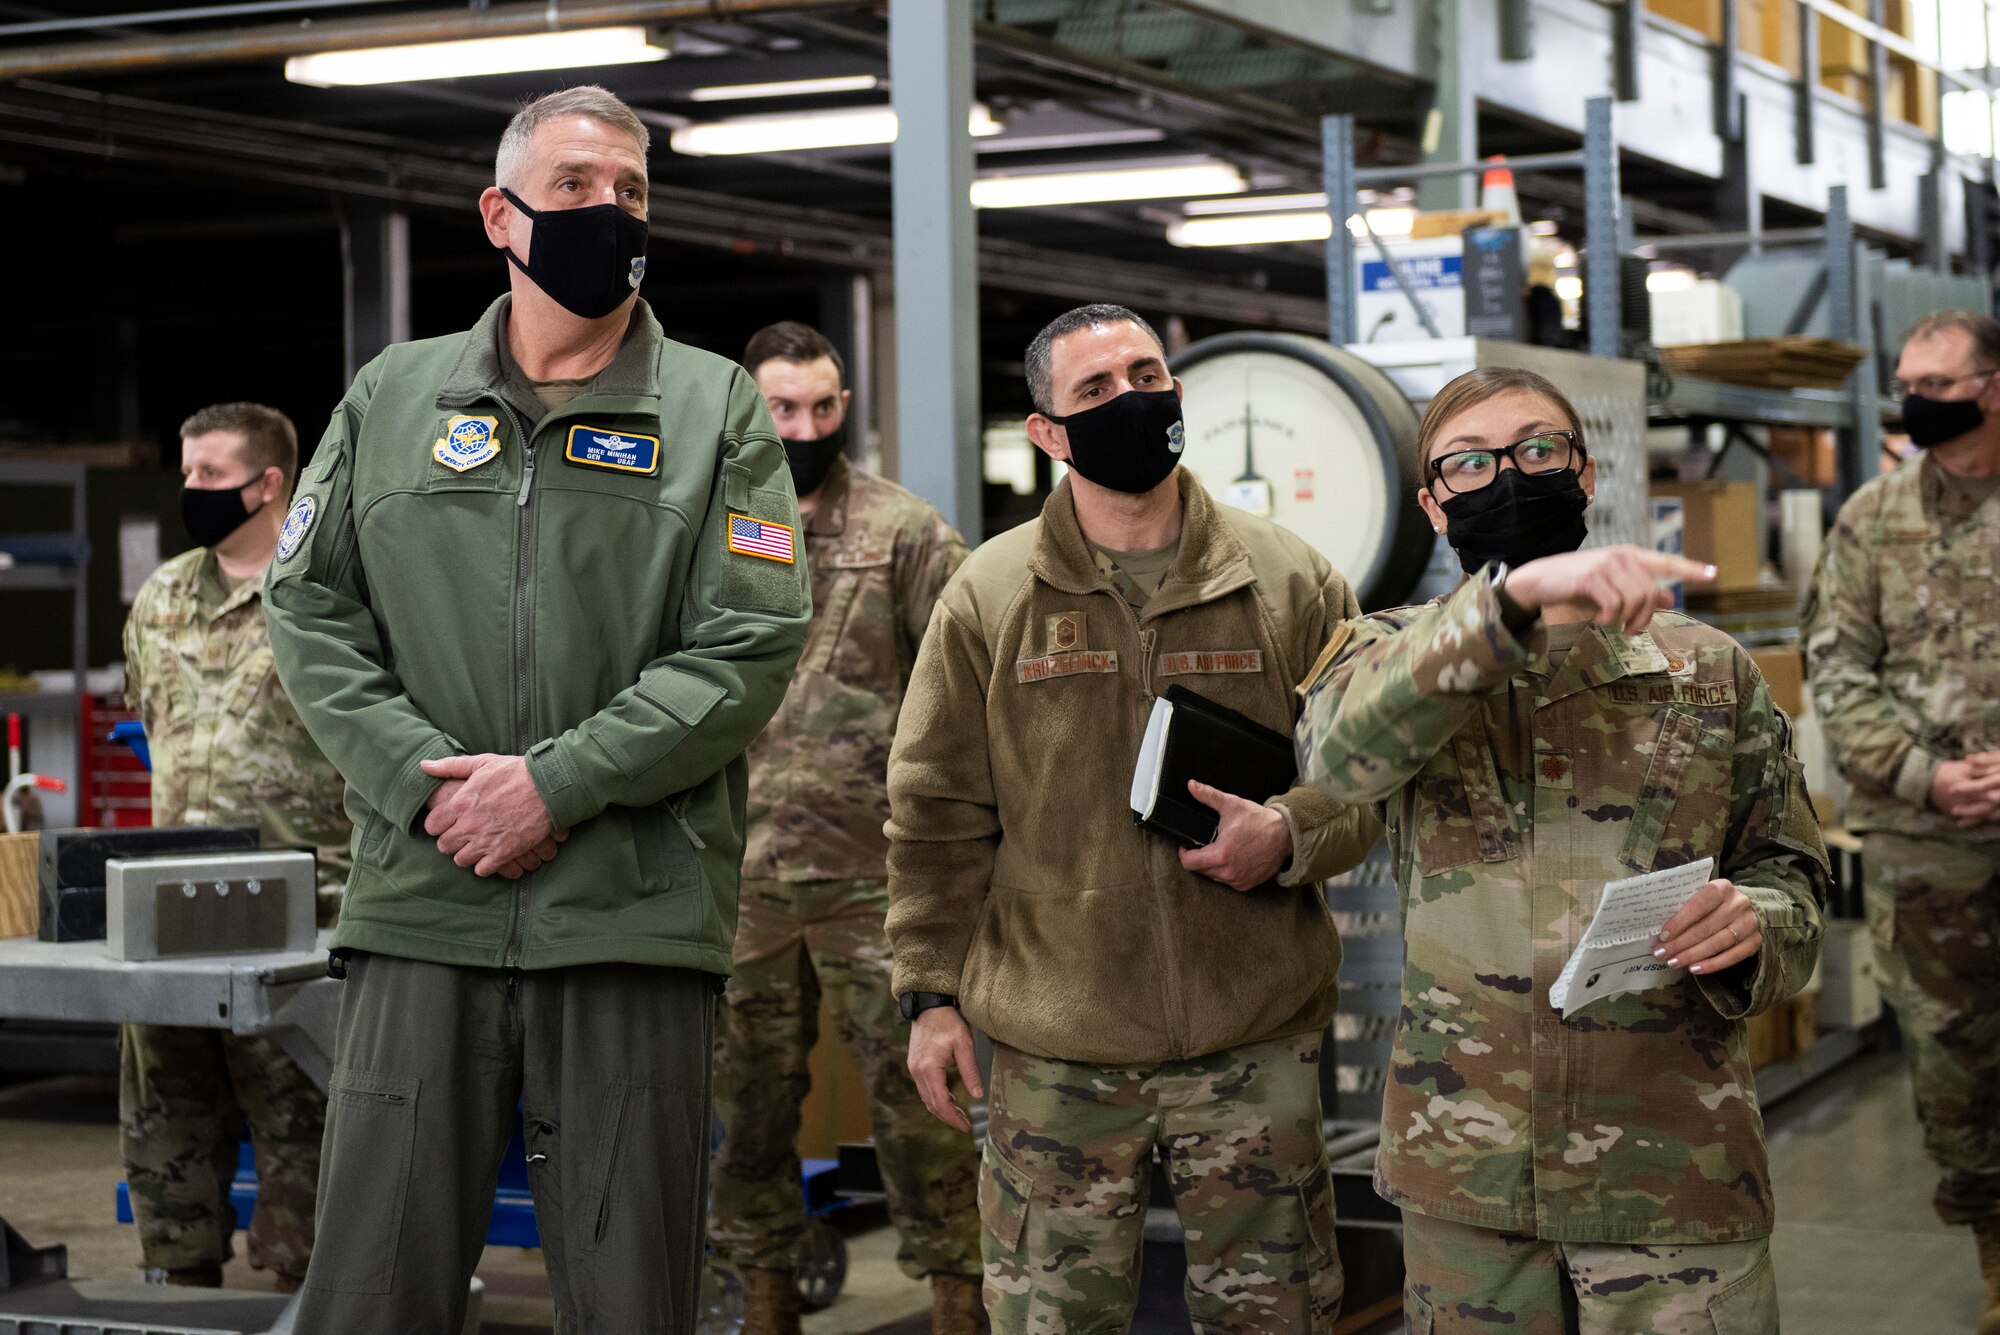 Maj Tia Ahlf, 92nd Logistics Readiness Squadron commander (right), walks Gen. Mike Minihan, Air Mobility Command commander (left), and Chief Master Sgt. Brian Kruzelnick, AMC command chief (middle), through a logistics warehouse at Fairchild Air Force Base, Washington, Jan. 6, 2022. Team Fairchild viewed this visit as an opportunity to showcase their successes and candidly explain the challenges they’ve faced. (U.S. Air Force photo by Amn Jenna A. Bond)